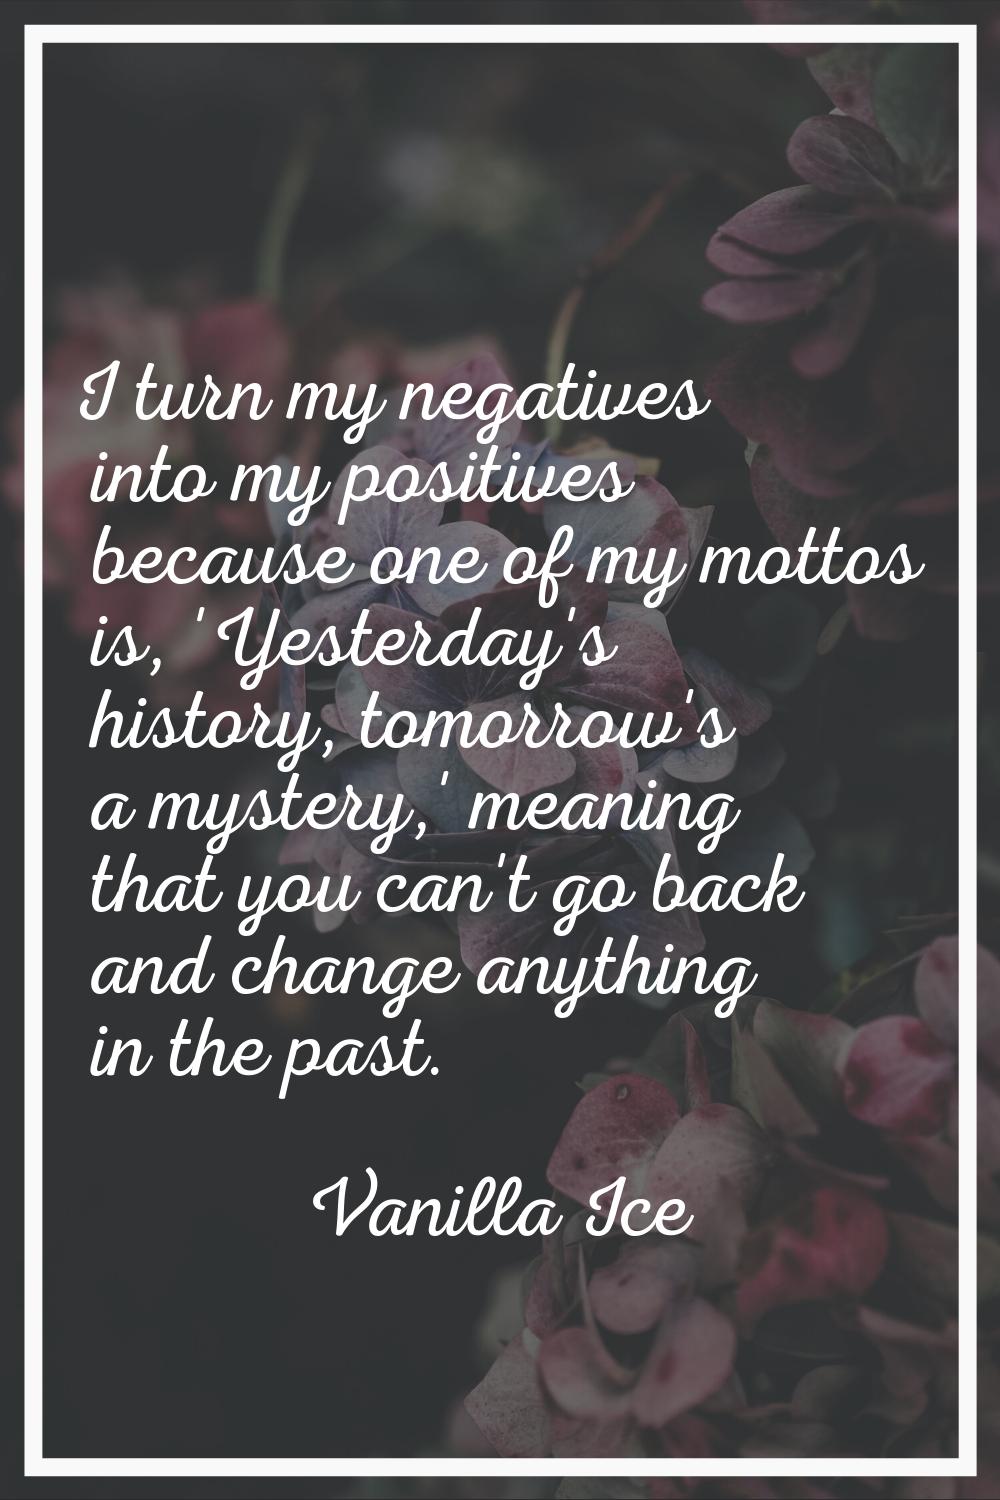 I turn my negatives into my positives because one of my mottos is, 'Yesterday's history, tomorrow's